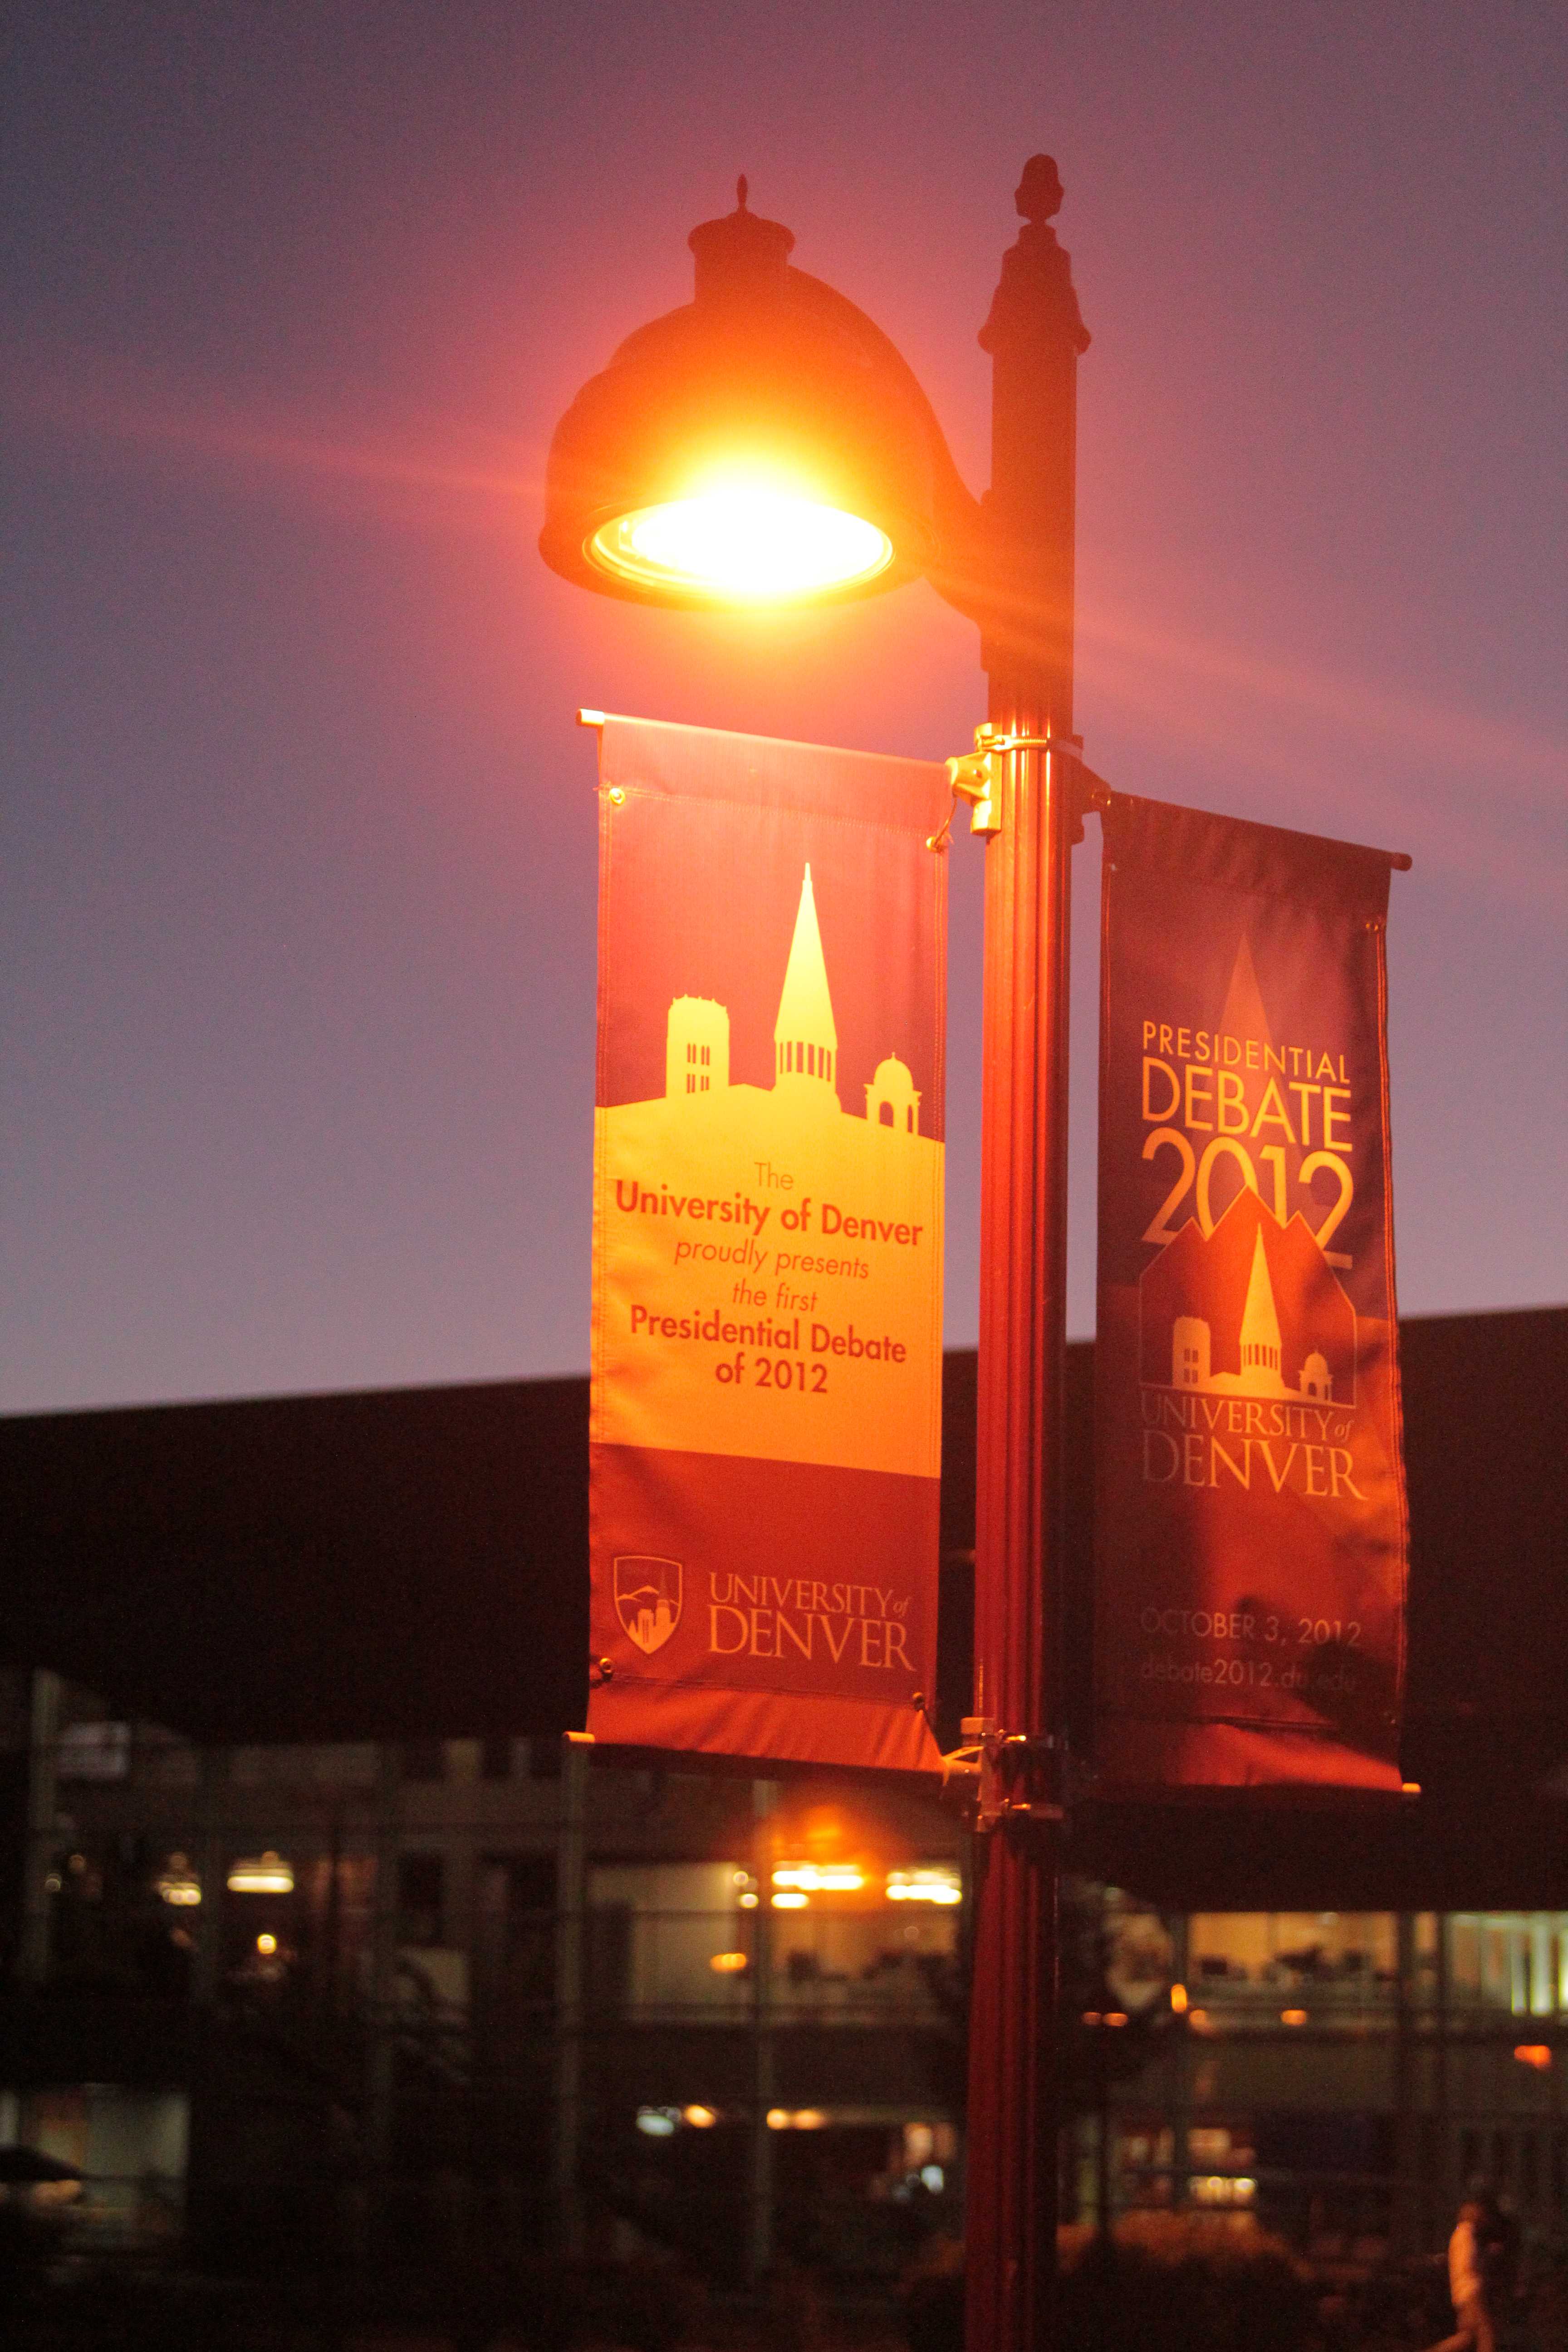 Banners announcing the debate hang from lampposts around the University of Denvers campus.